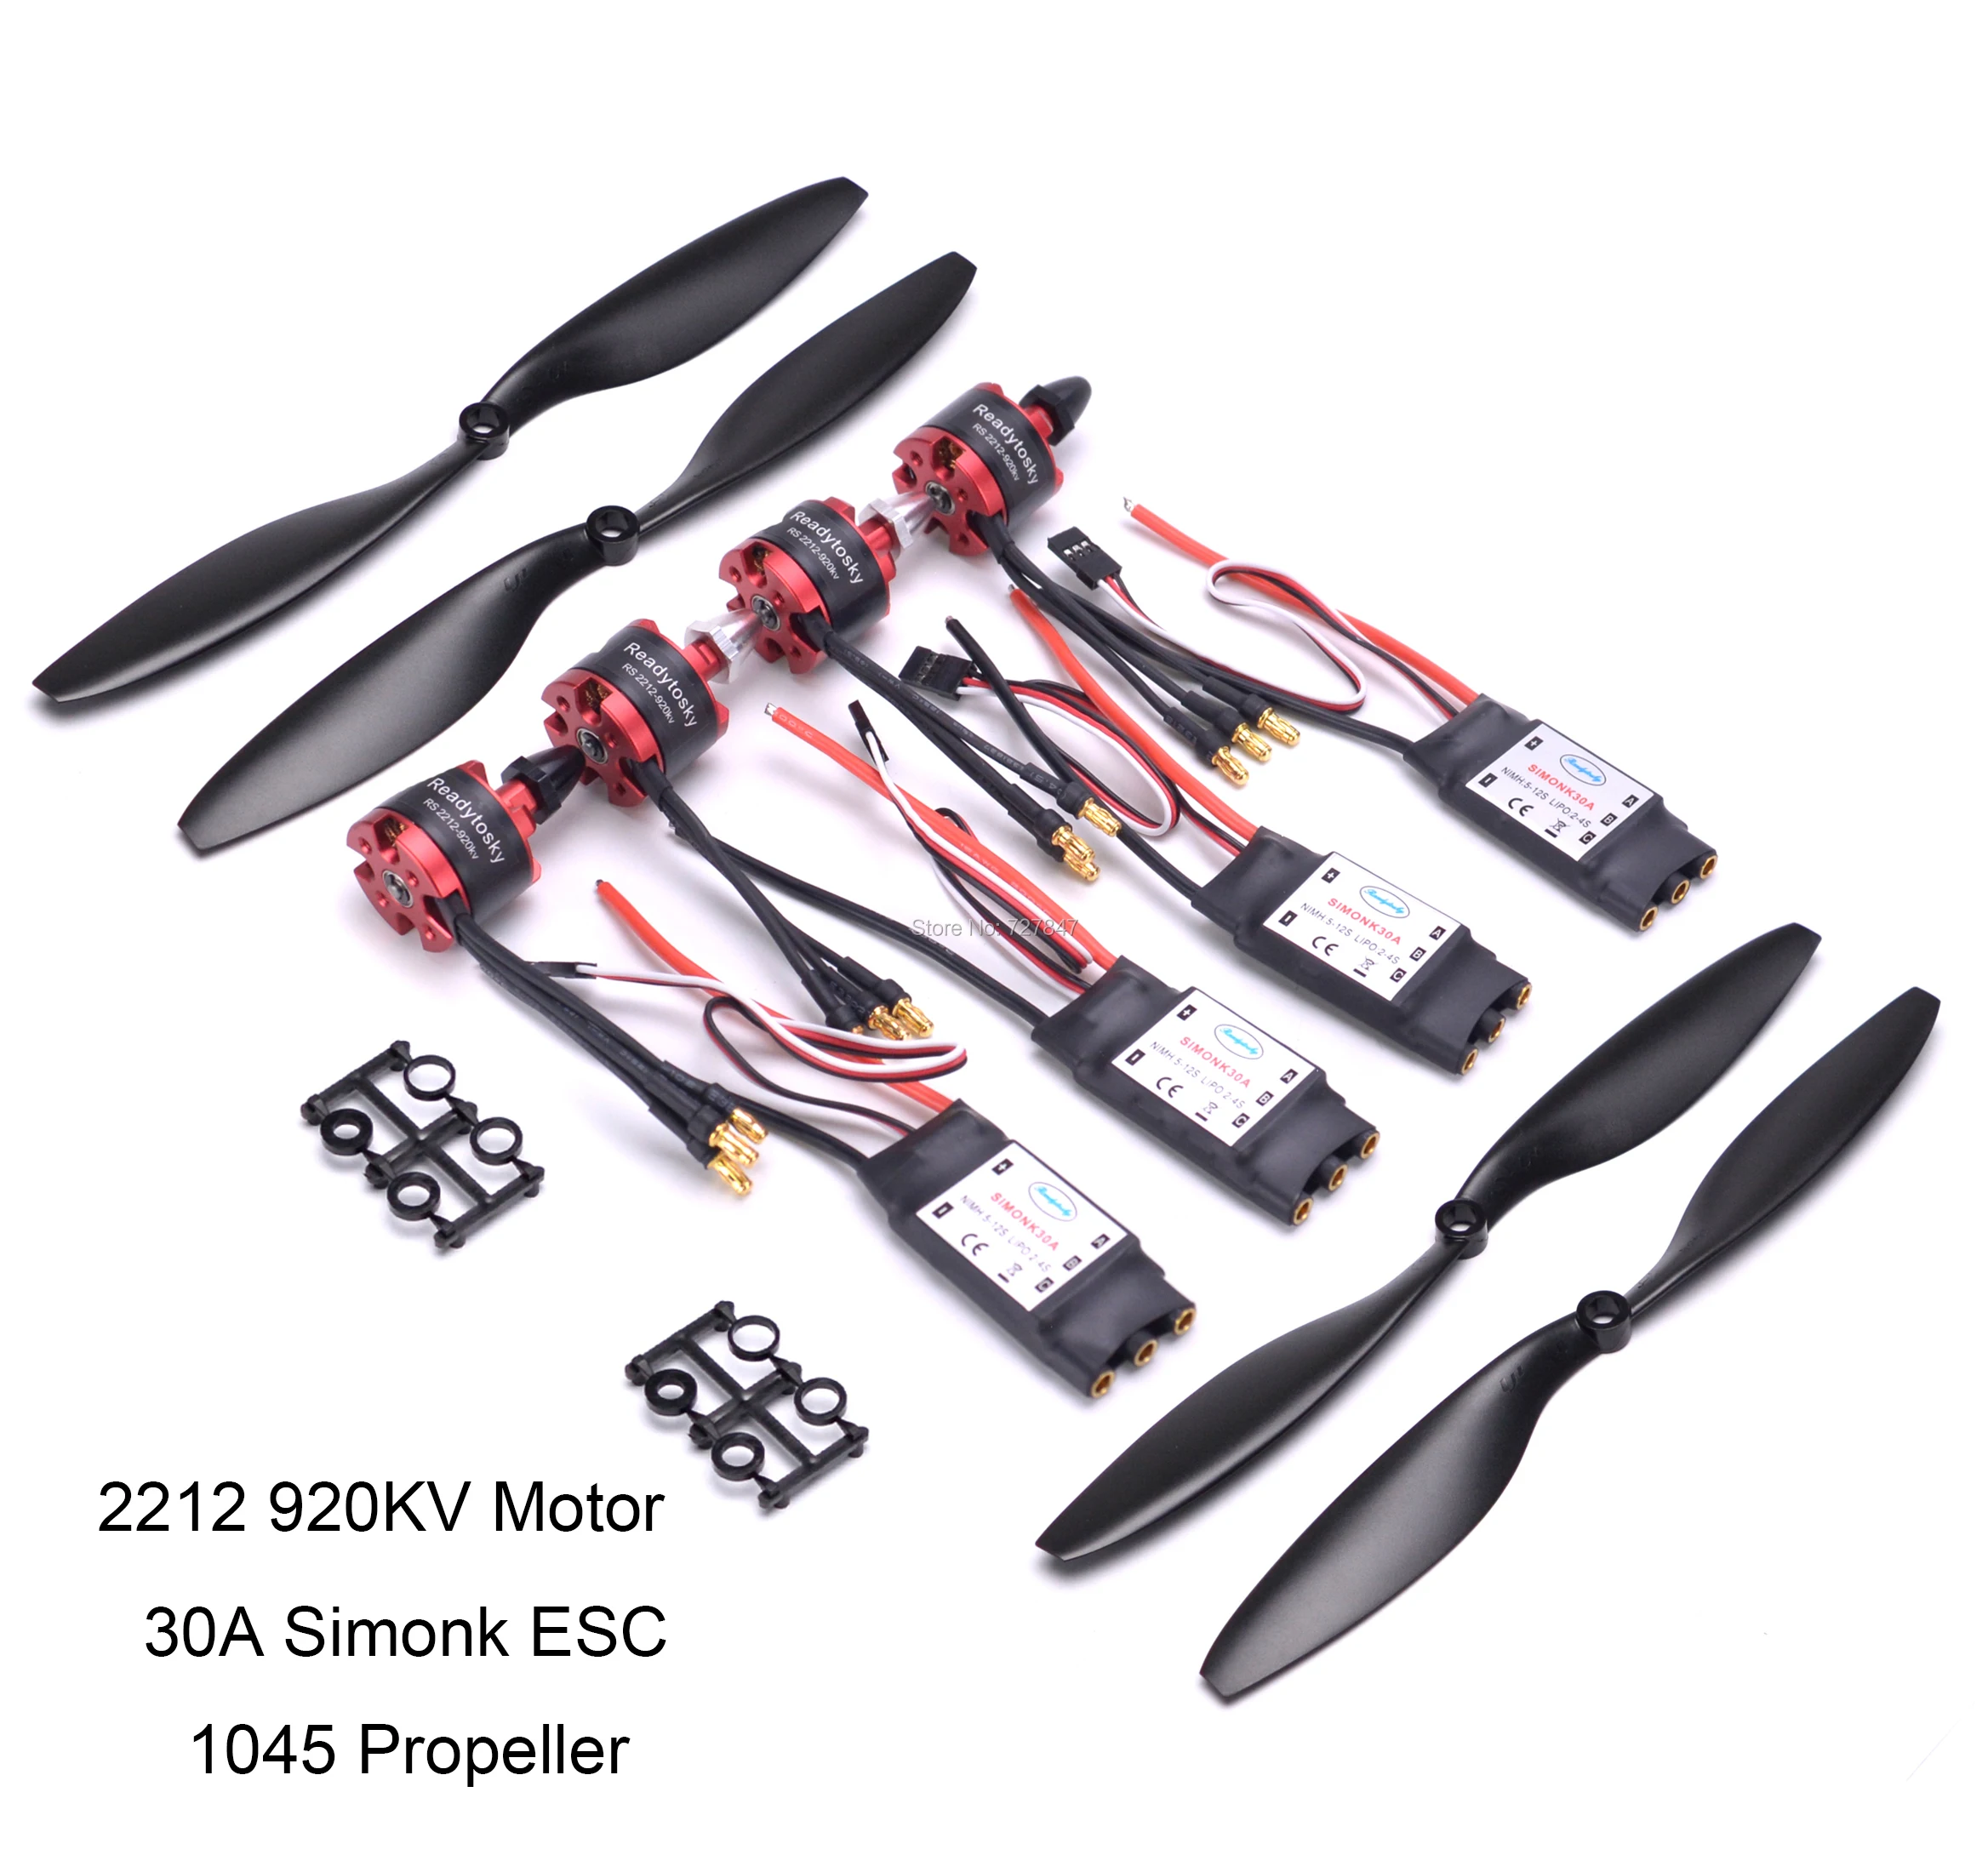 

30A Simonk ESC with 3.5mm Connector 2212 920KV CW CCW Brushless Motor 1045 Propeller for F450 F550 S550 F550 Multicopter